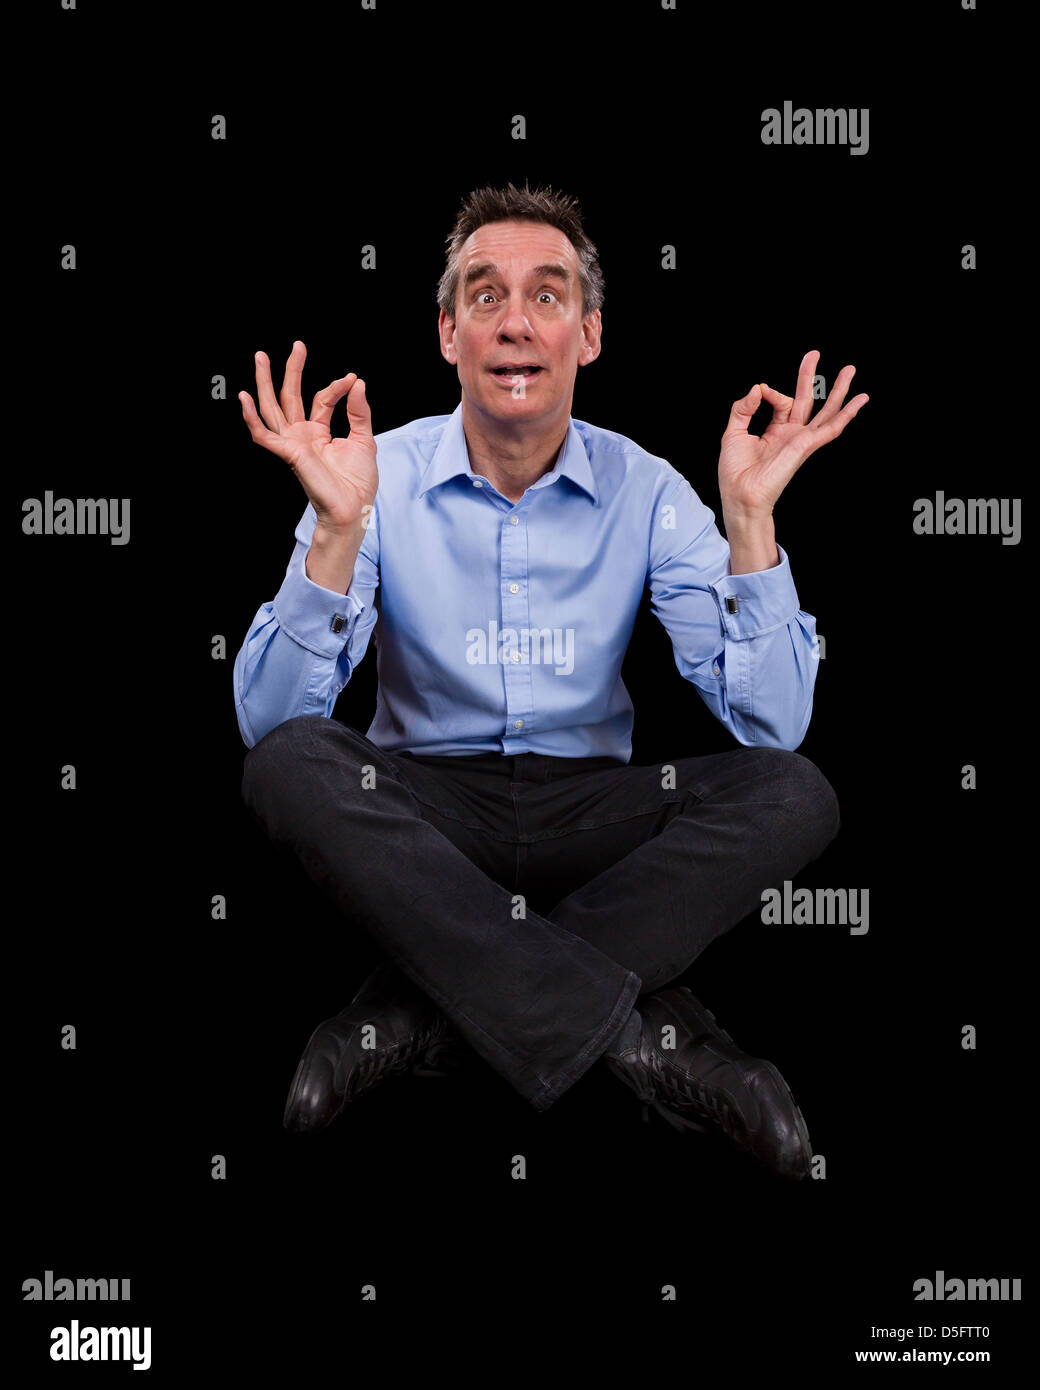 Handsome Middle Age Business Man Meditating Pulling Funny Face Black Background Stock Photo